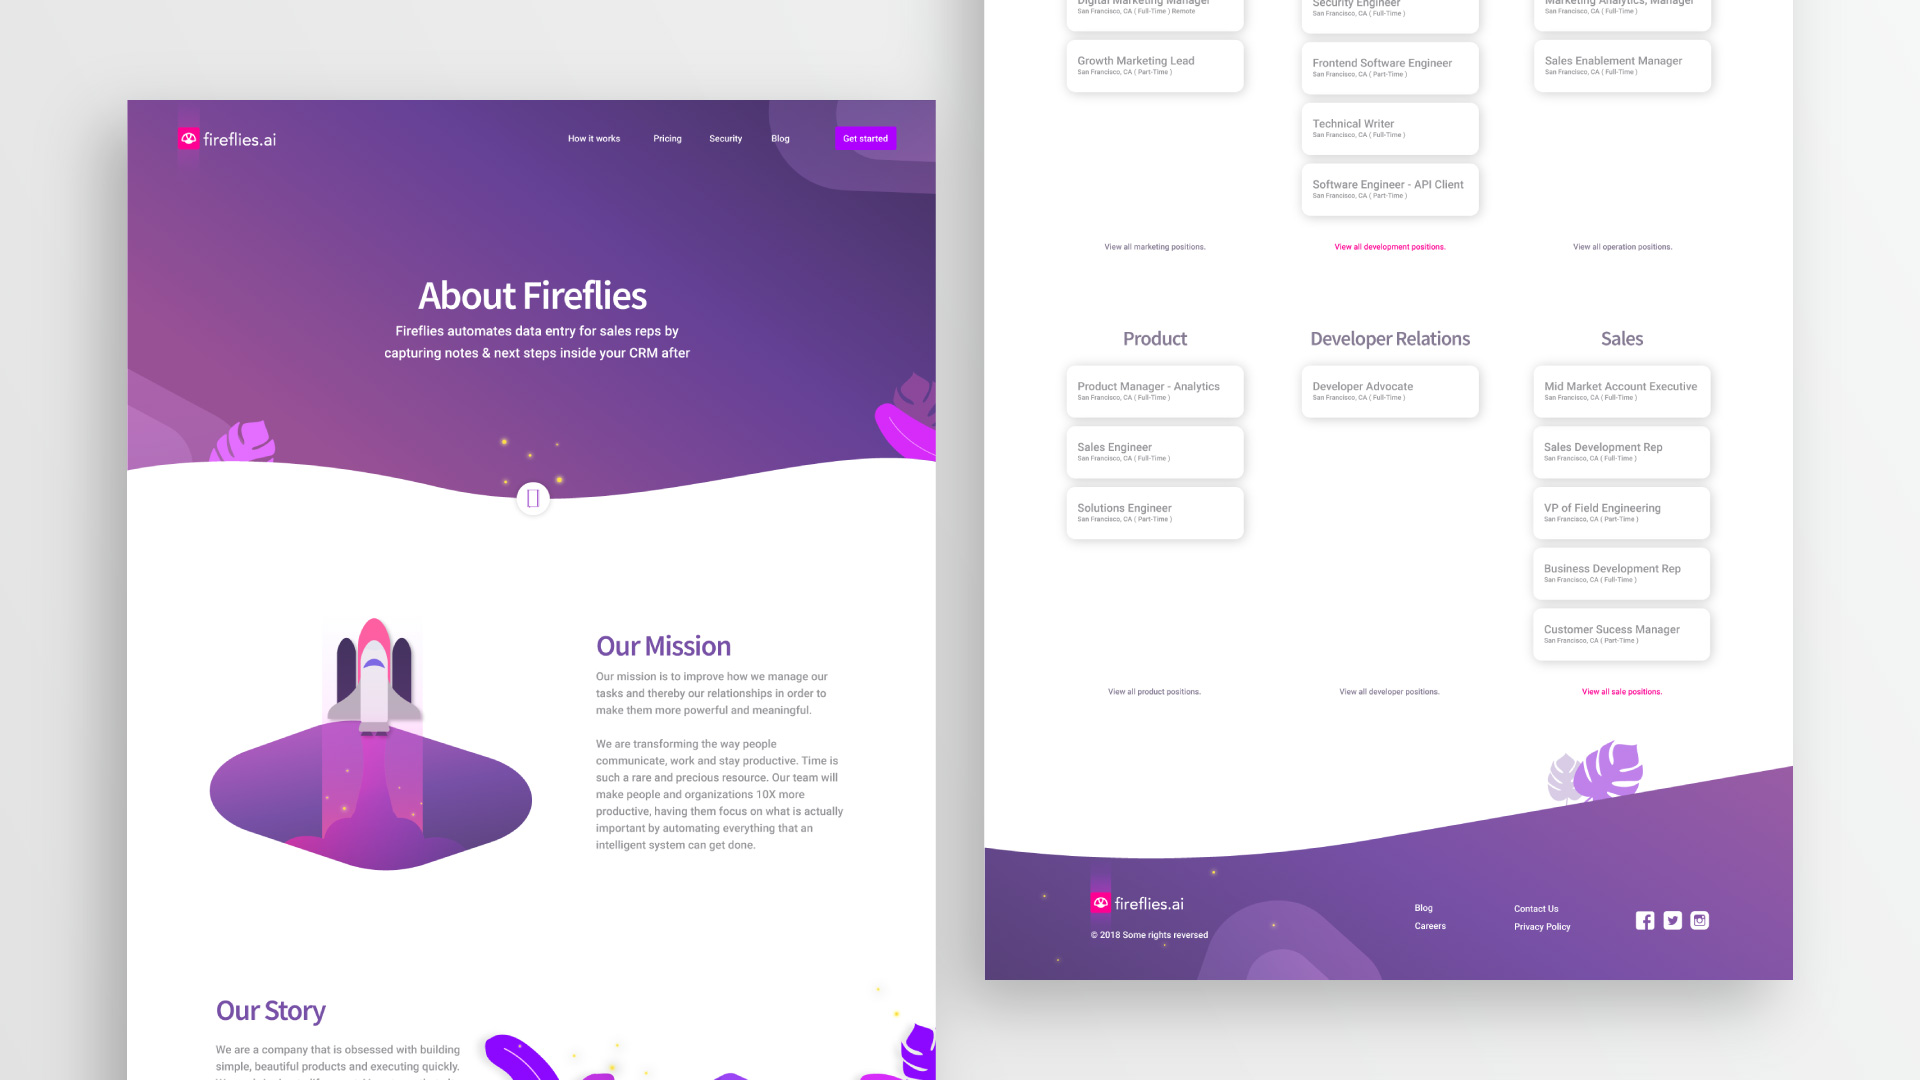 About page designed for Fireflies.ai by Raymond Shen & Satyajit Das 2018